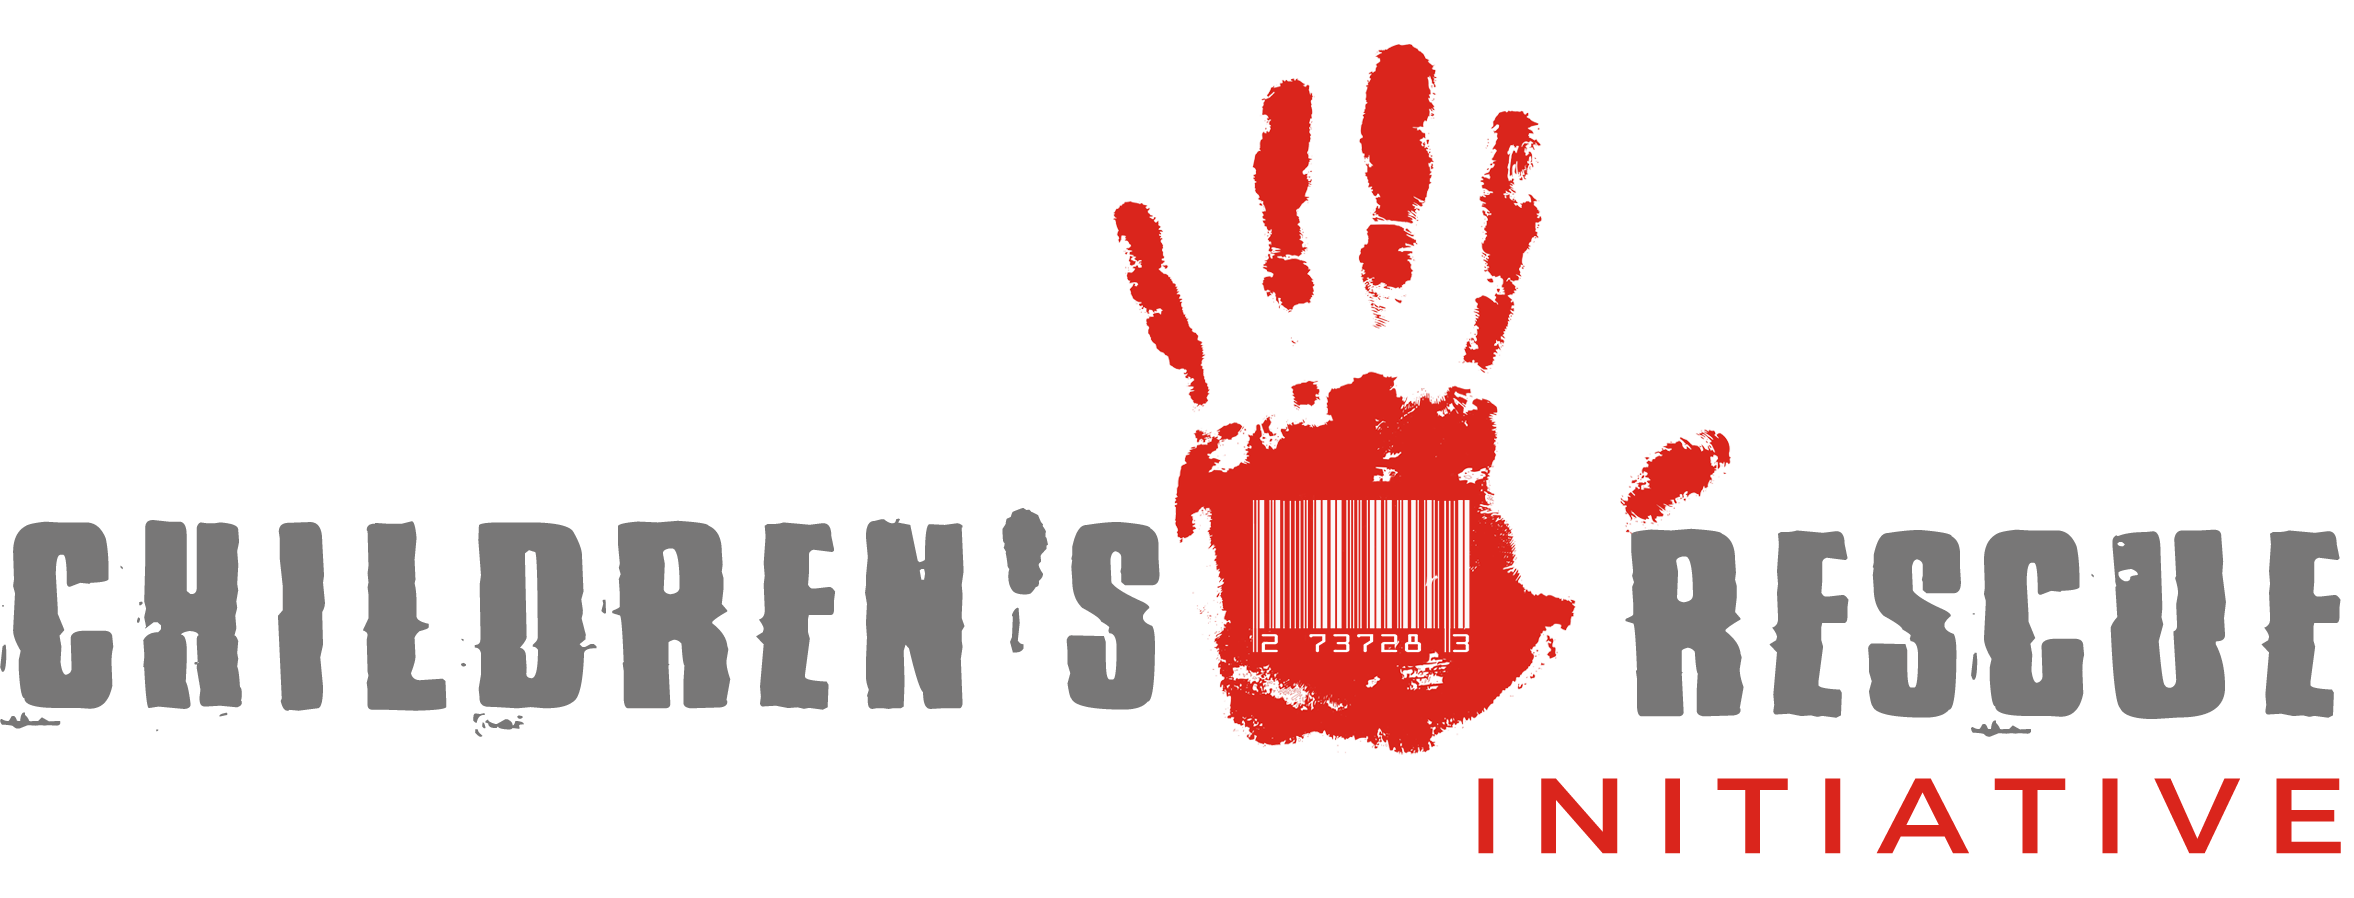 Childrens Rescue Initiative Logo Type with Red Hand print